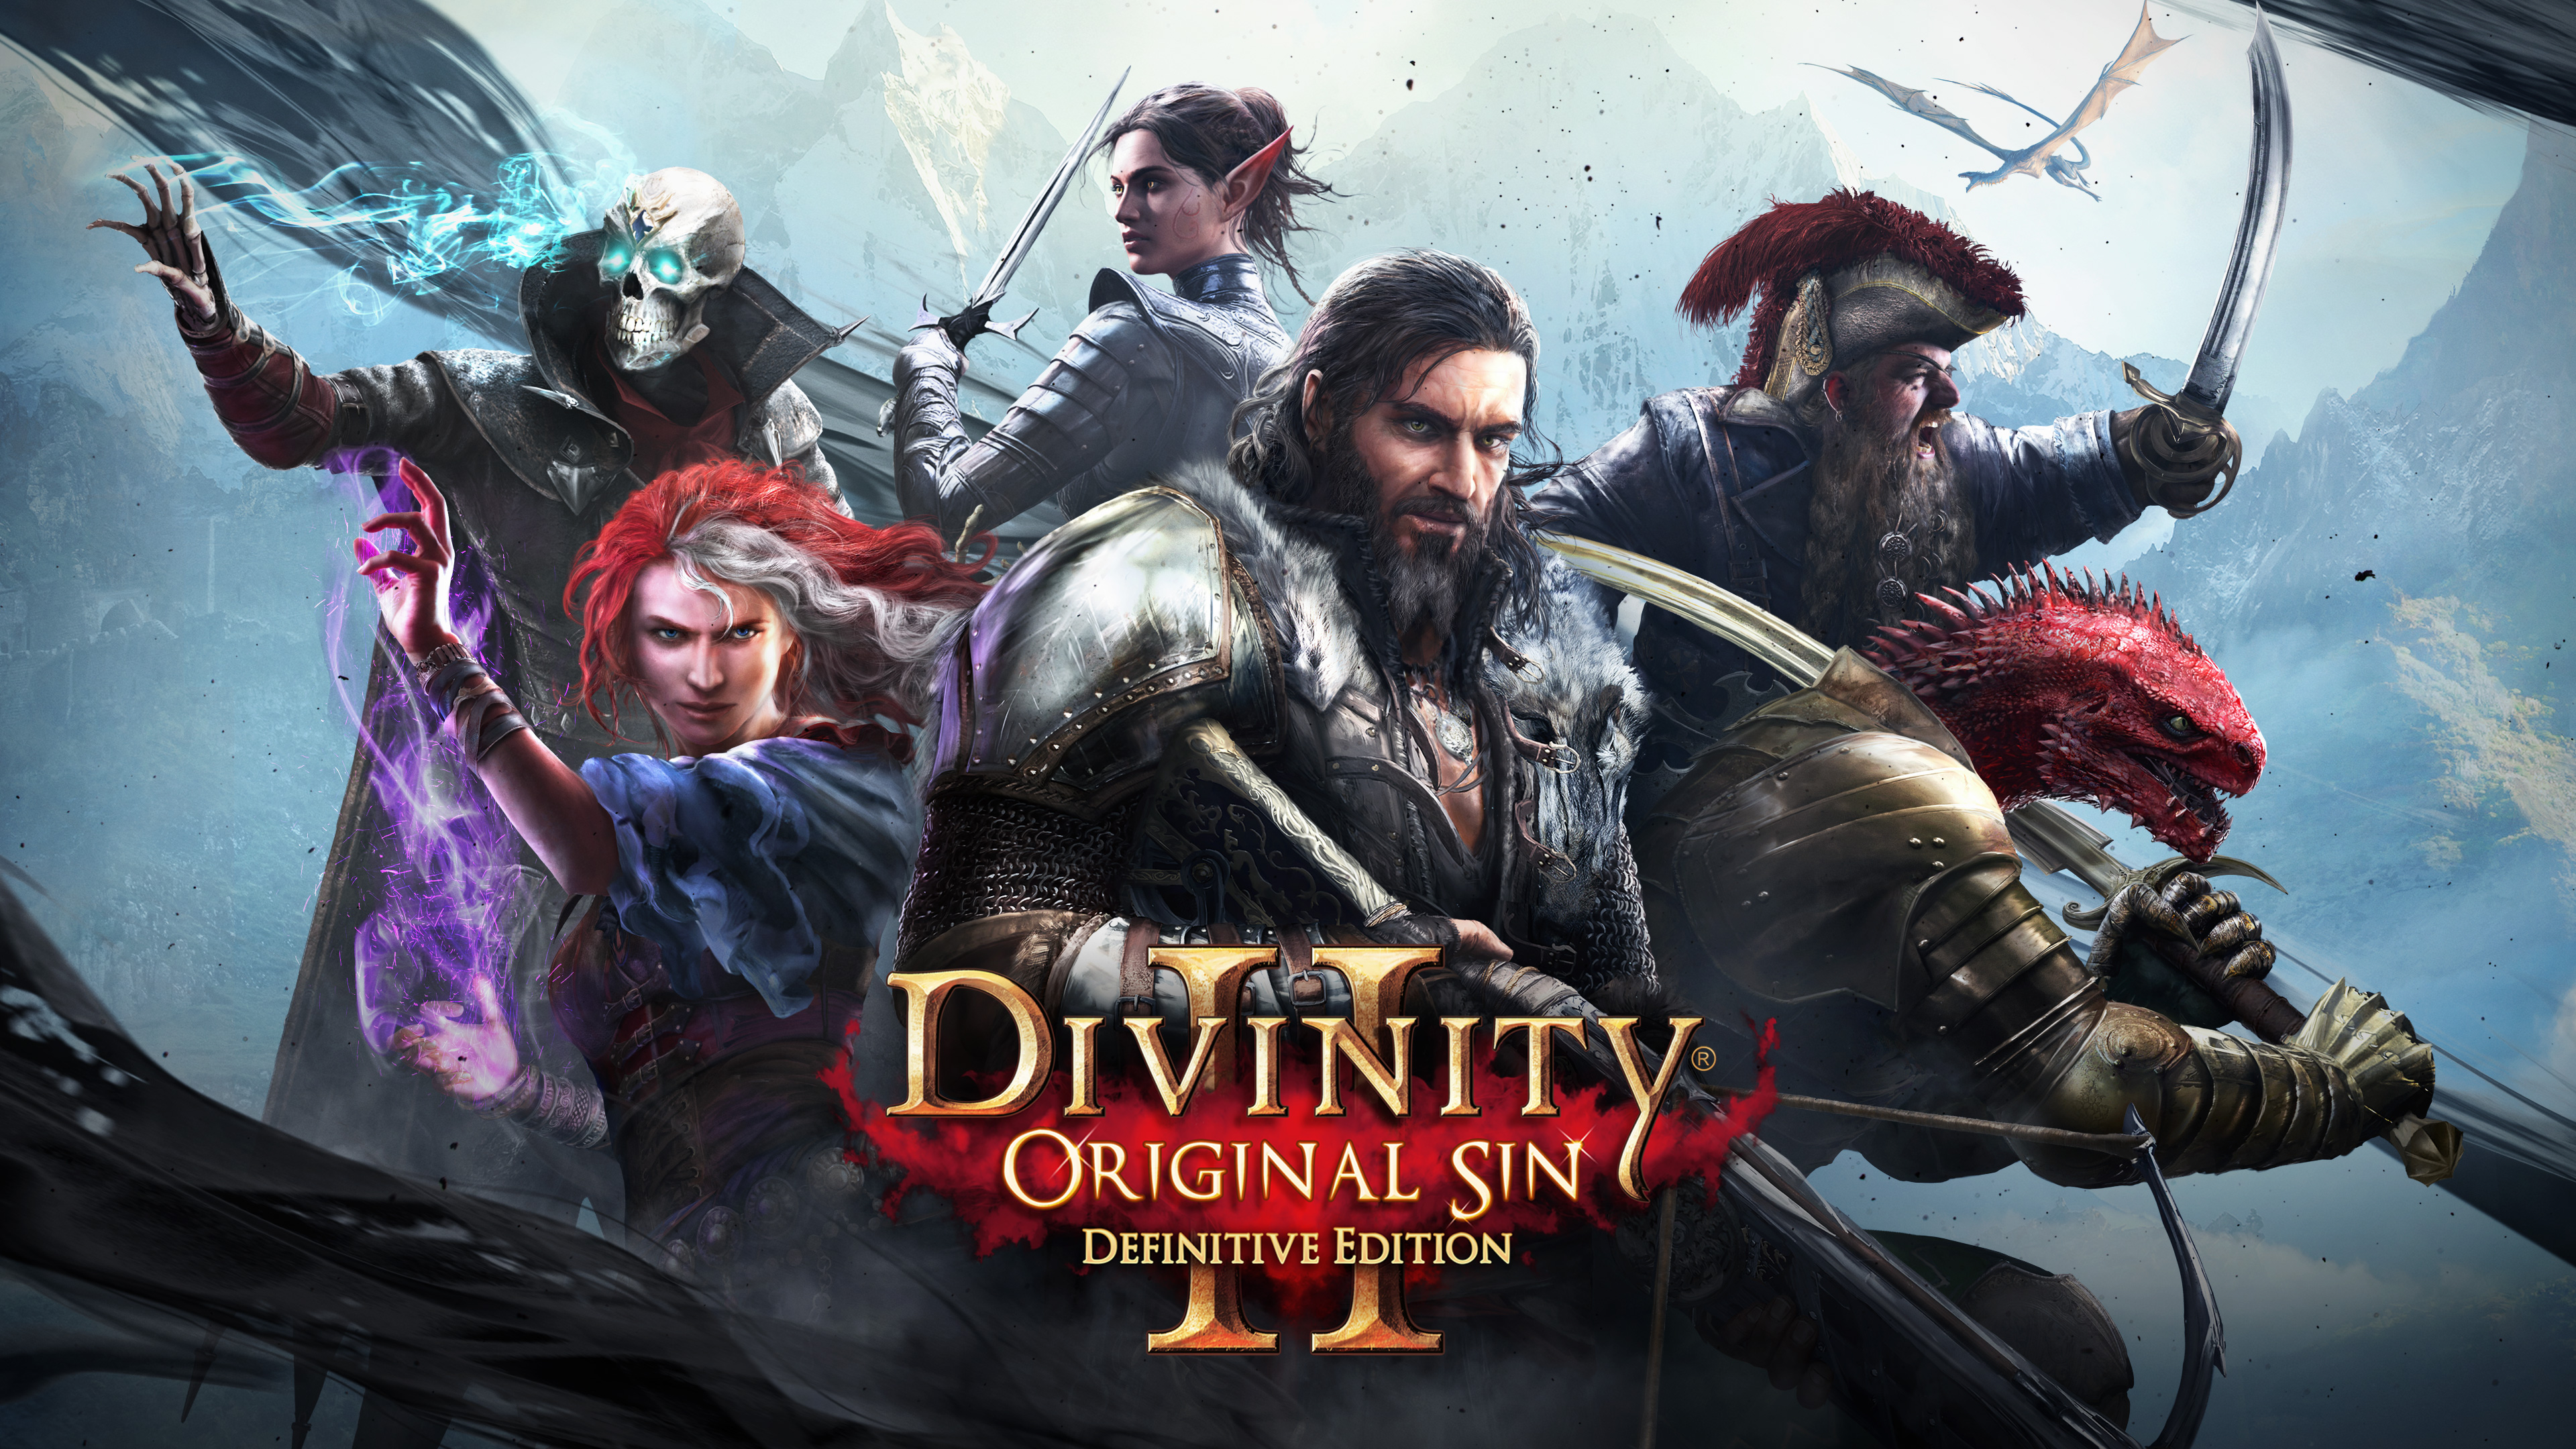 Divinity original sin k hd games k wallpapers images backgrounds photos and pictures